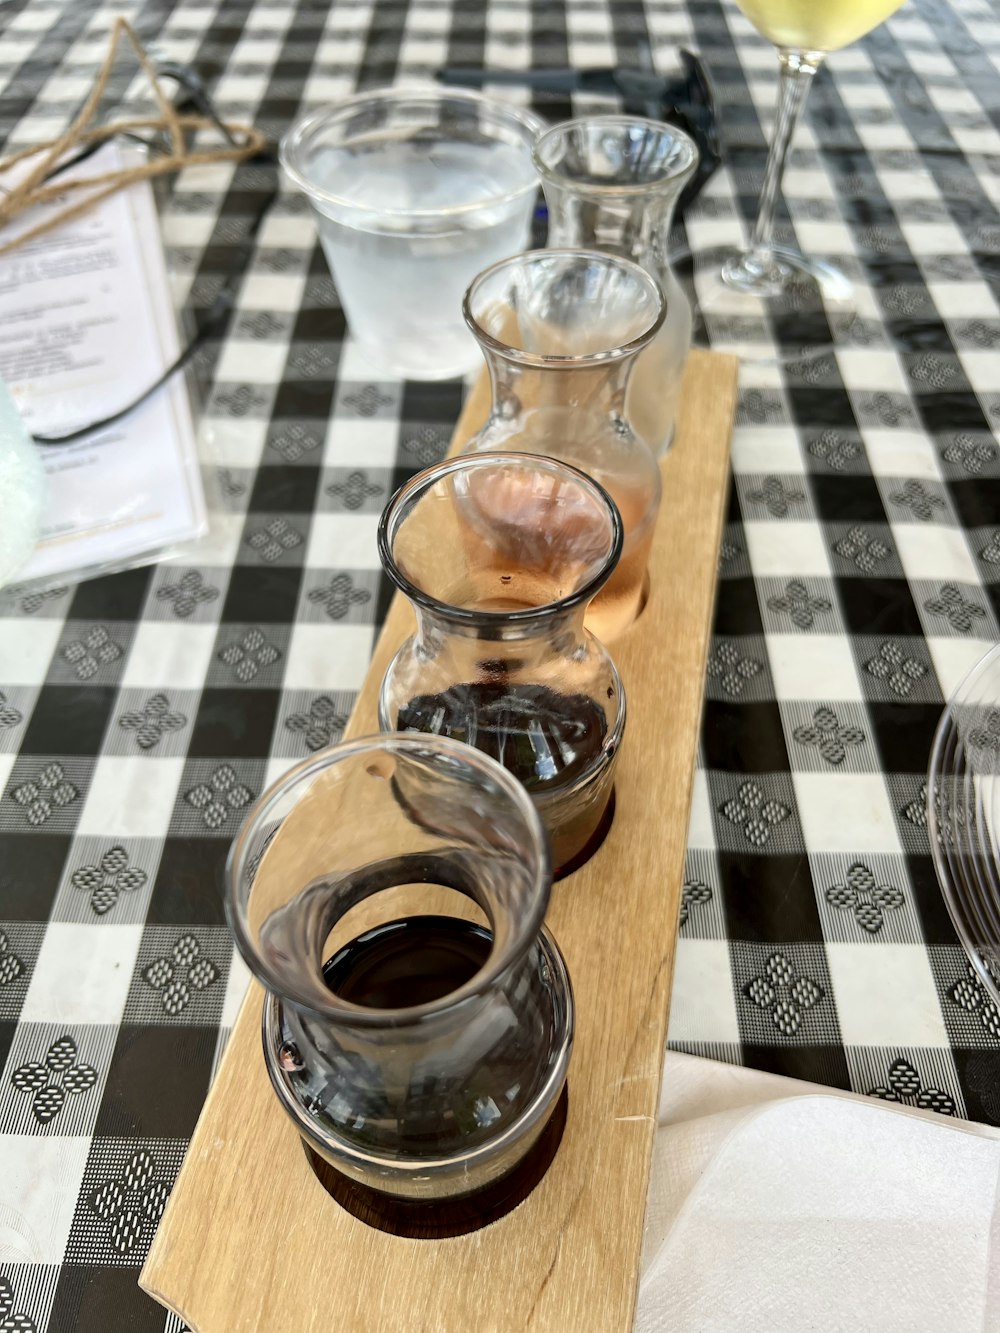 a glass bottle with a brown liquid in it next to a glass with a brown liquid in it